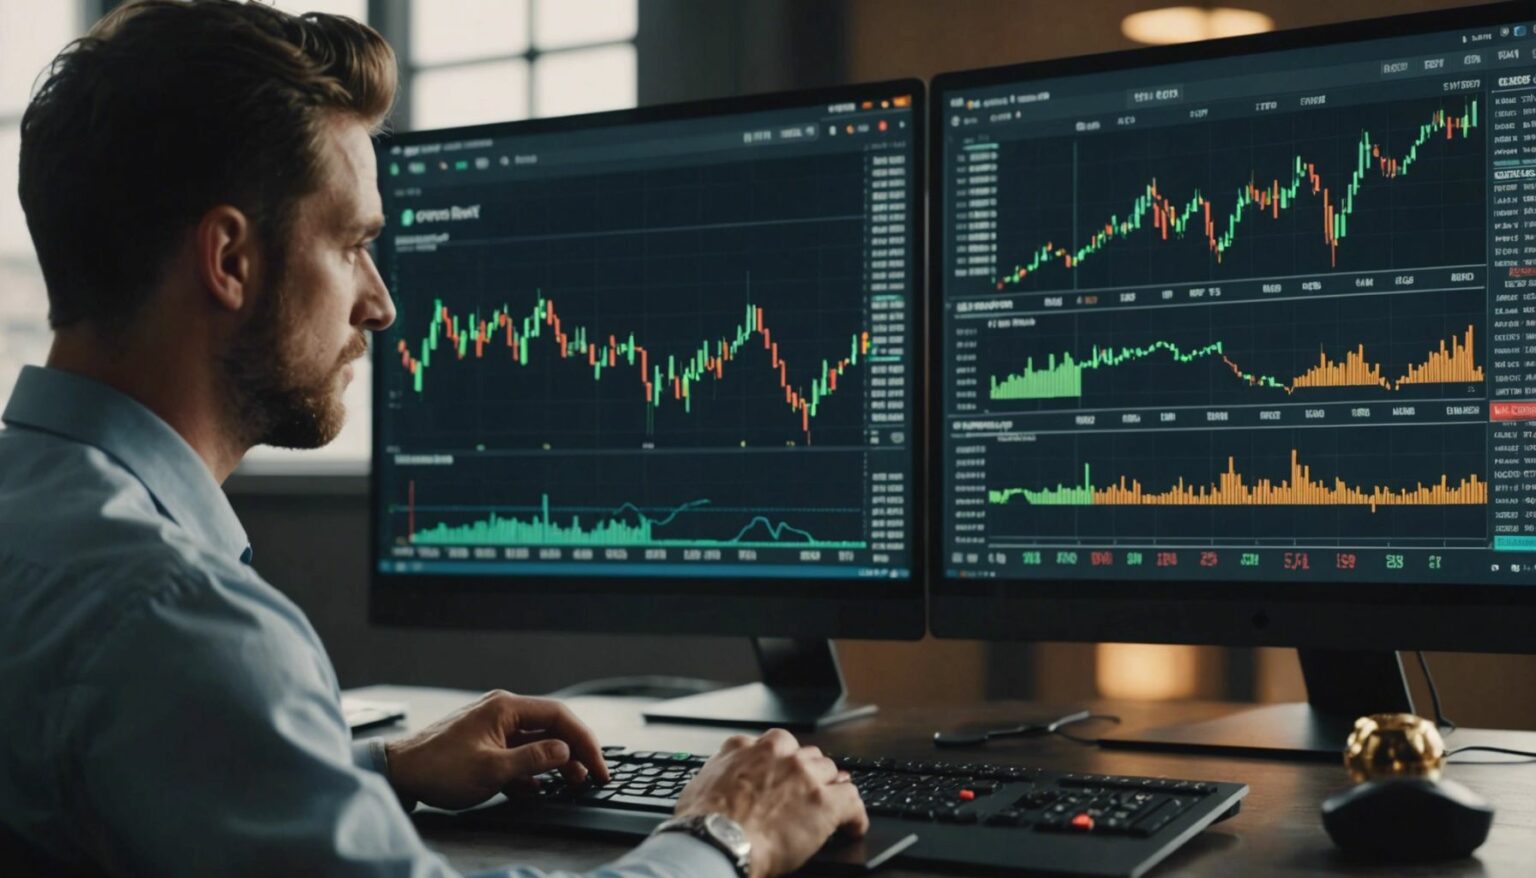 Confident trader analyzing cryptocurrency market data on a computer with stock chart and crypto symbols in the background.